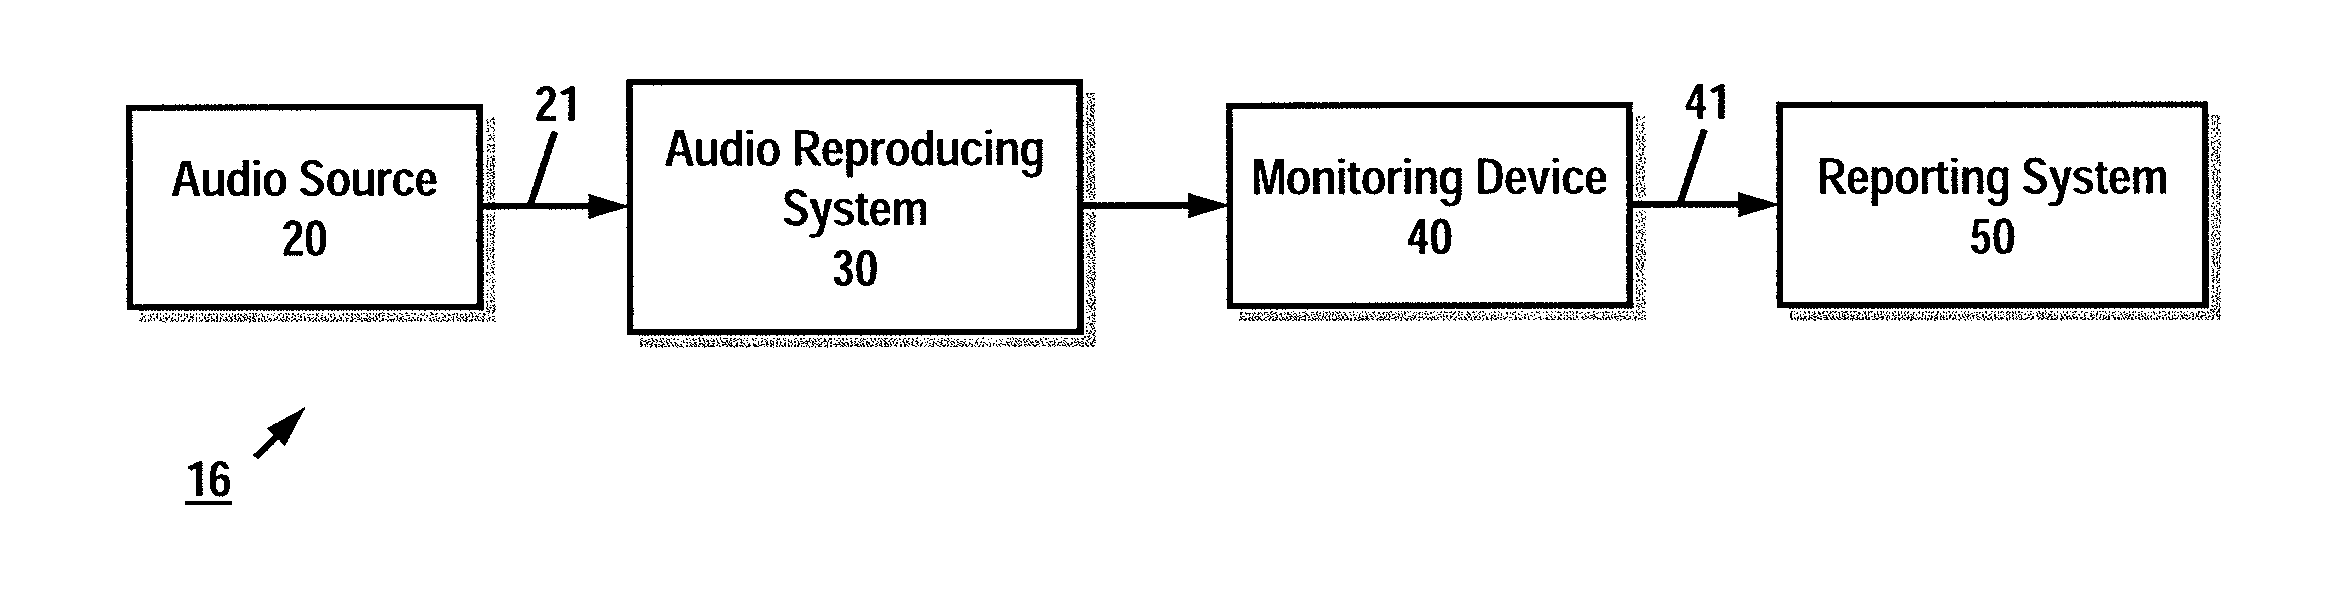 Activating functions in processing devices using start codes embedded in audio